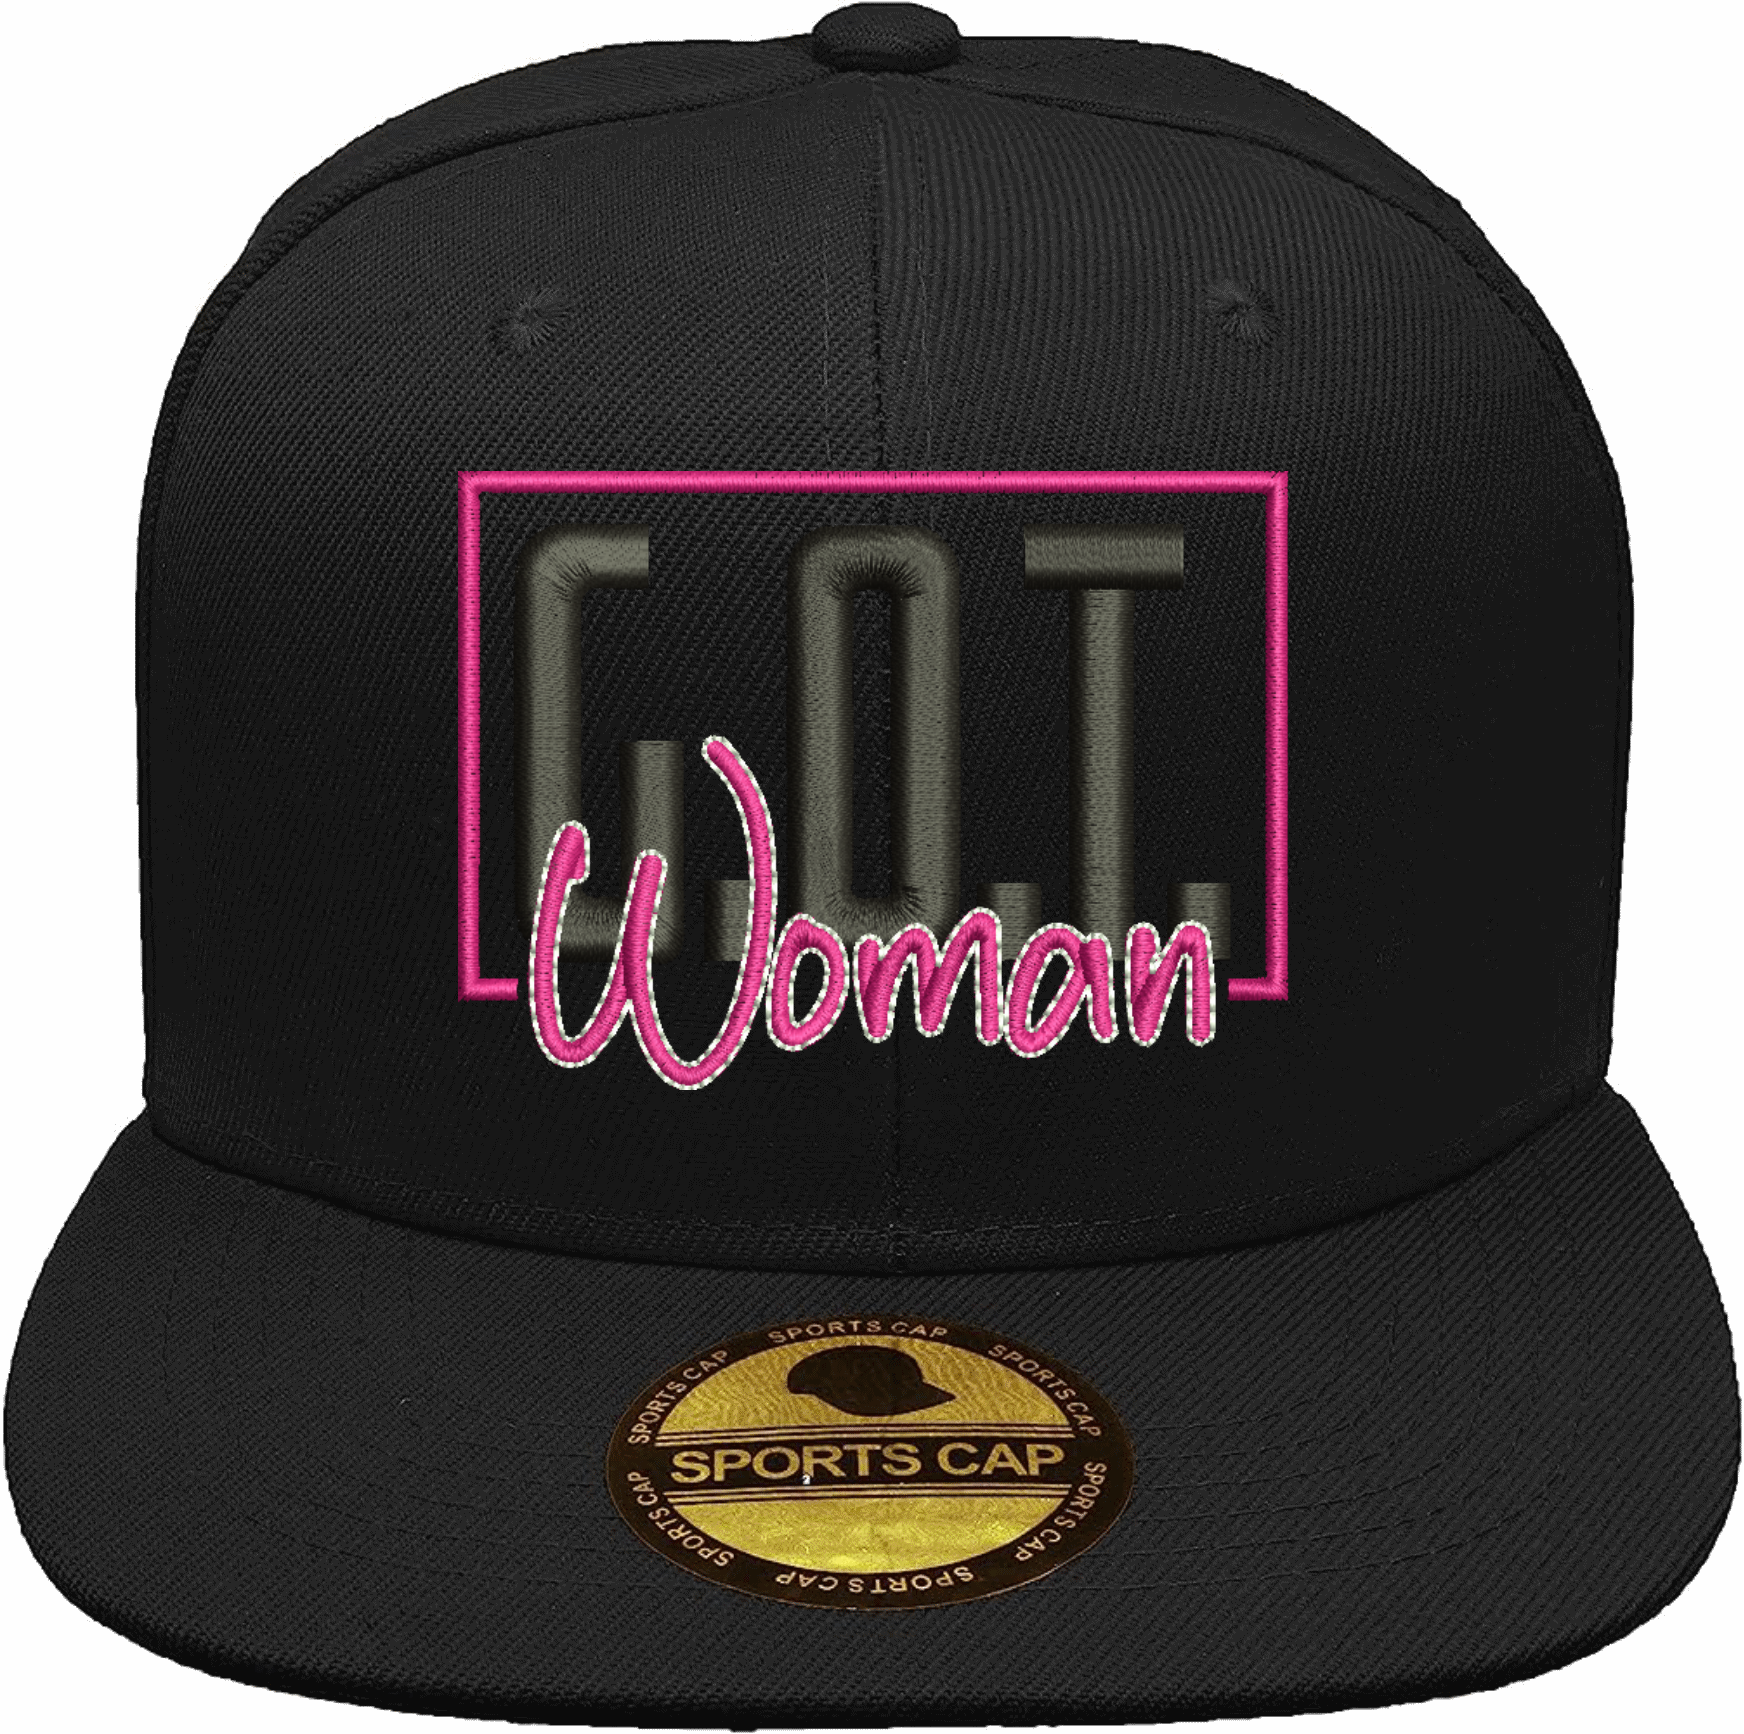 G.O.T WOMAN—God's Over This Woman Cap